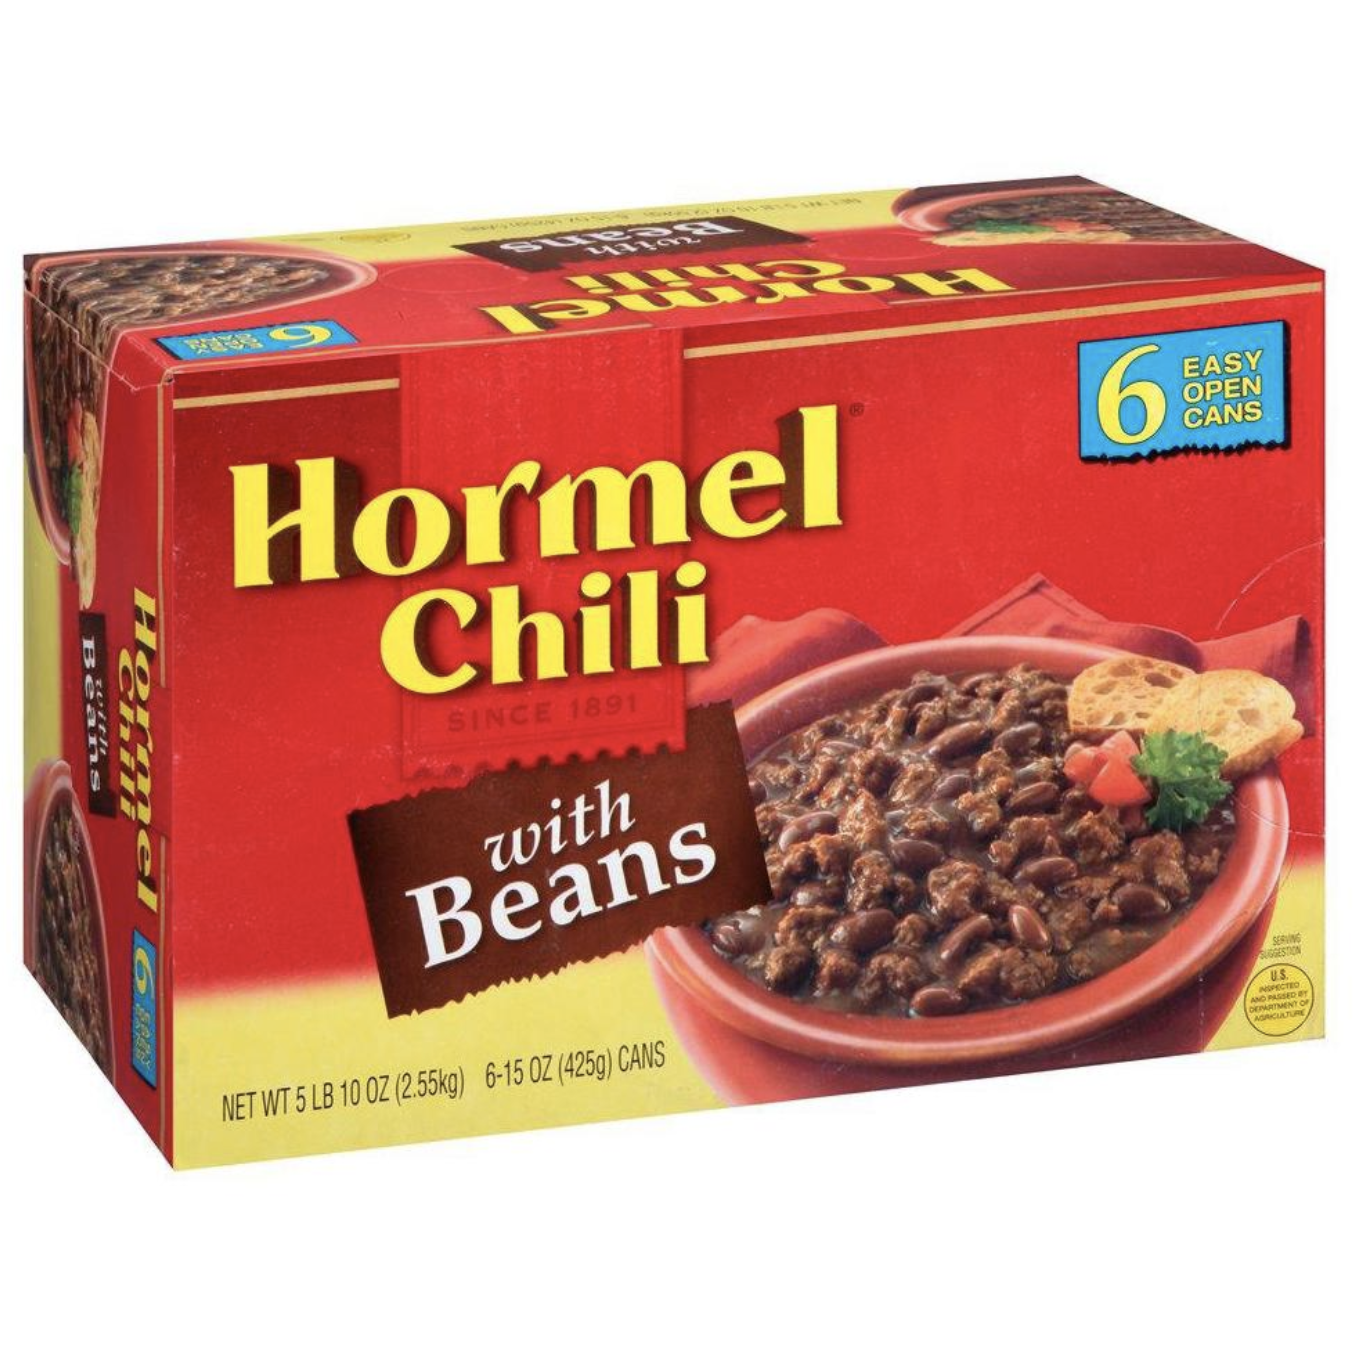 Hormel Chili with Beans, 6 pk./15 oz.